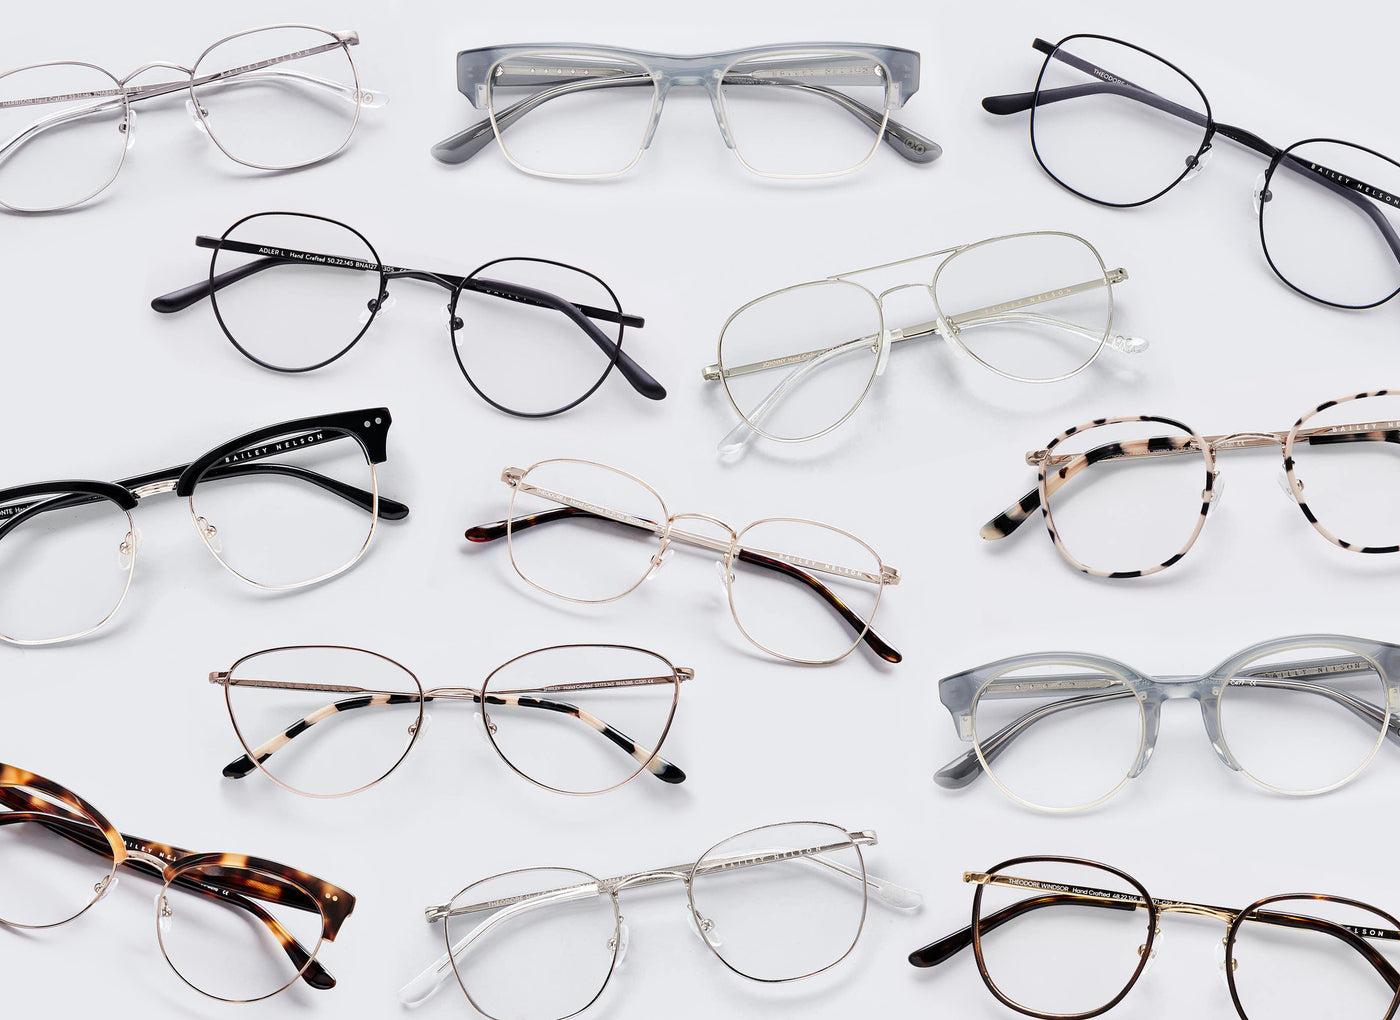 collections/Metal-Frames-Glasses.jpg